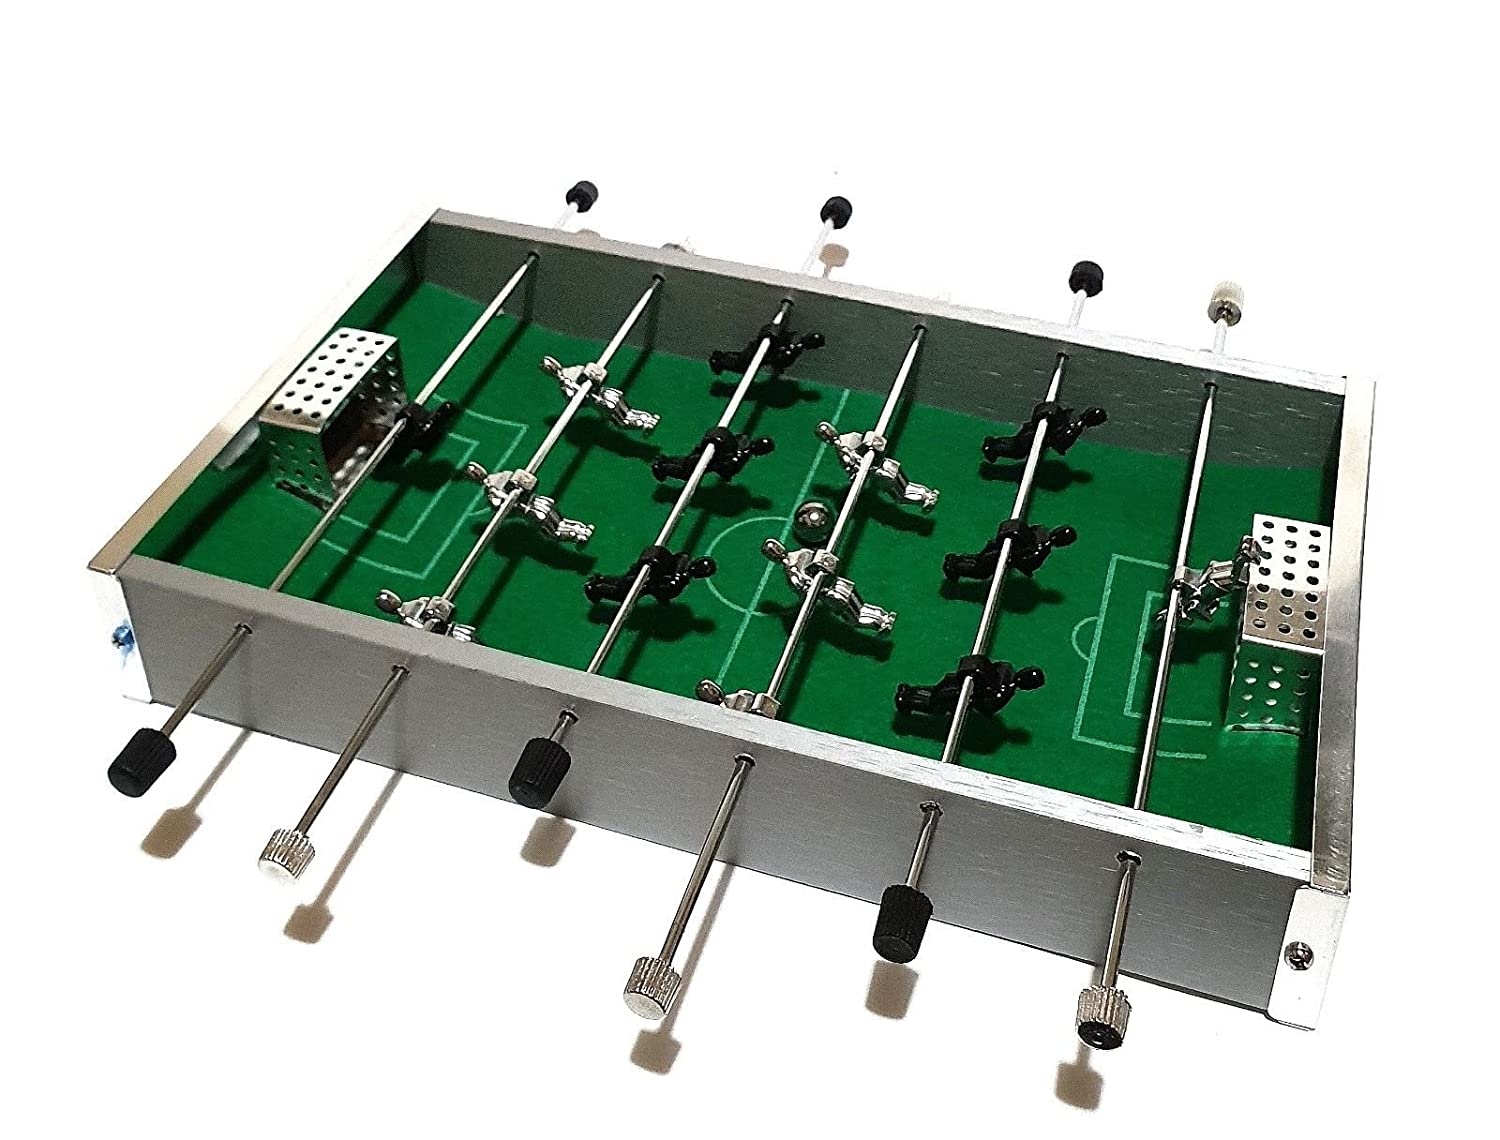 How much does a foosball table cost?